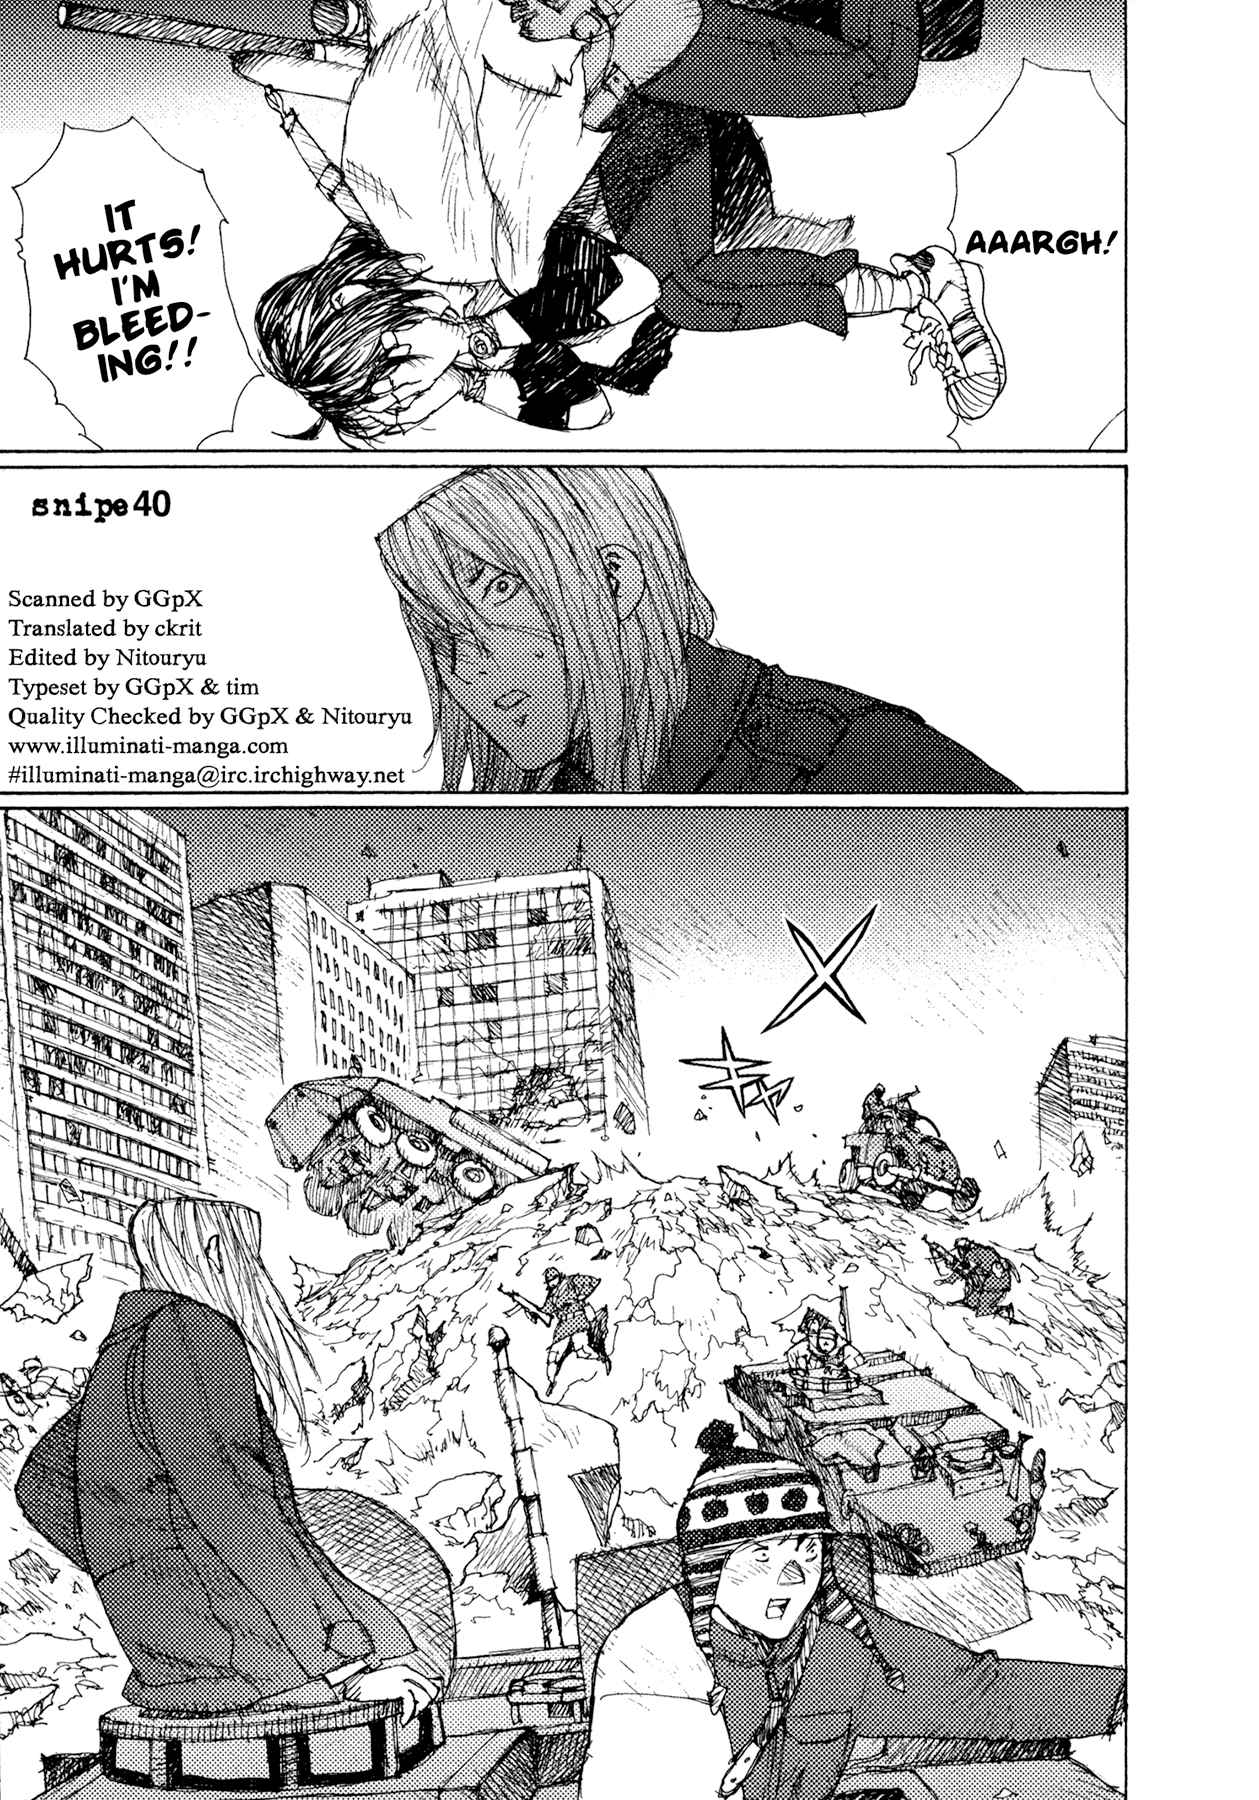 Alice from Hell Vol. 6 Ch. 40 Check, Next